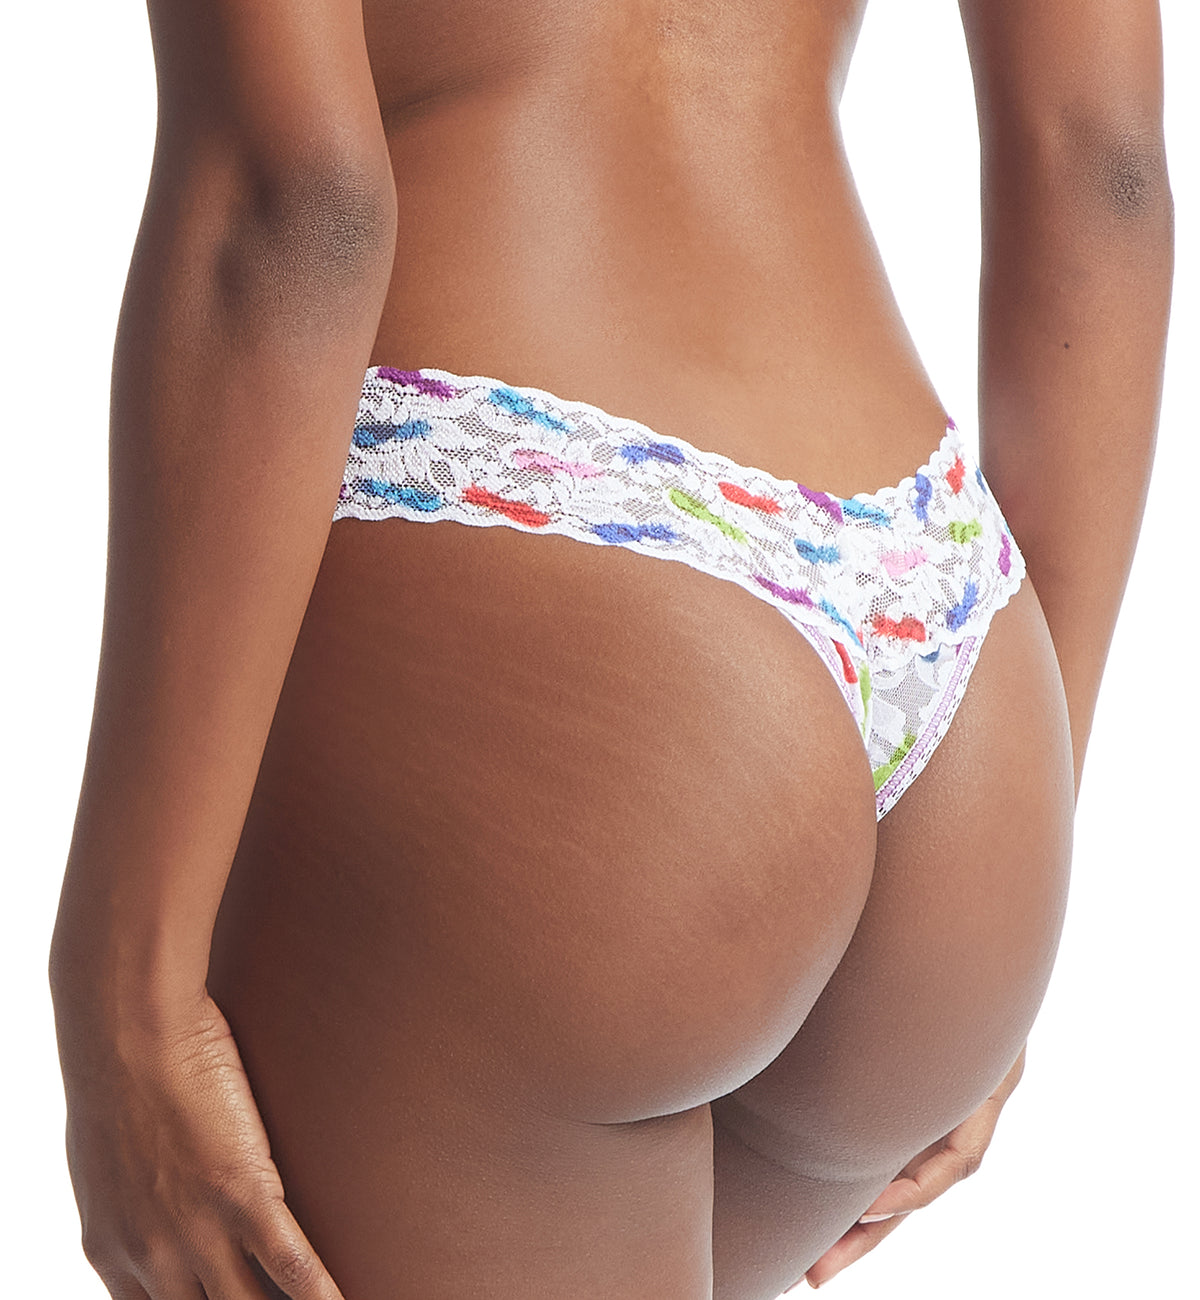 Hanky Panky Signature Lace Printed Low Rise Thong (PR4911P),Pineapple Island - Pineapple Island,One Size